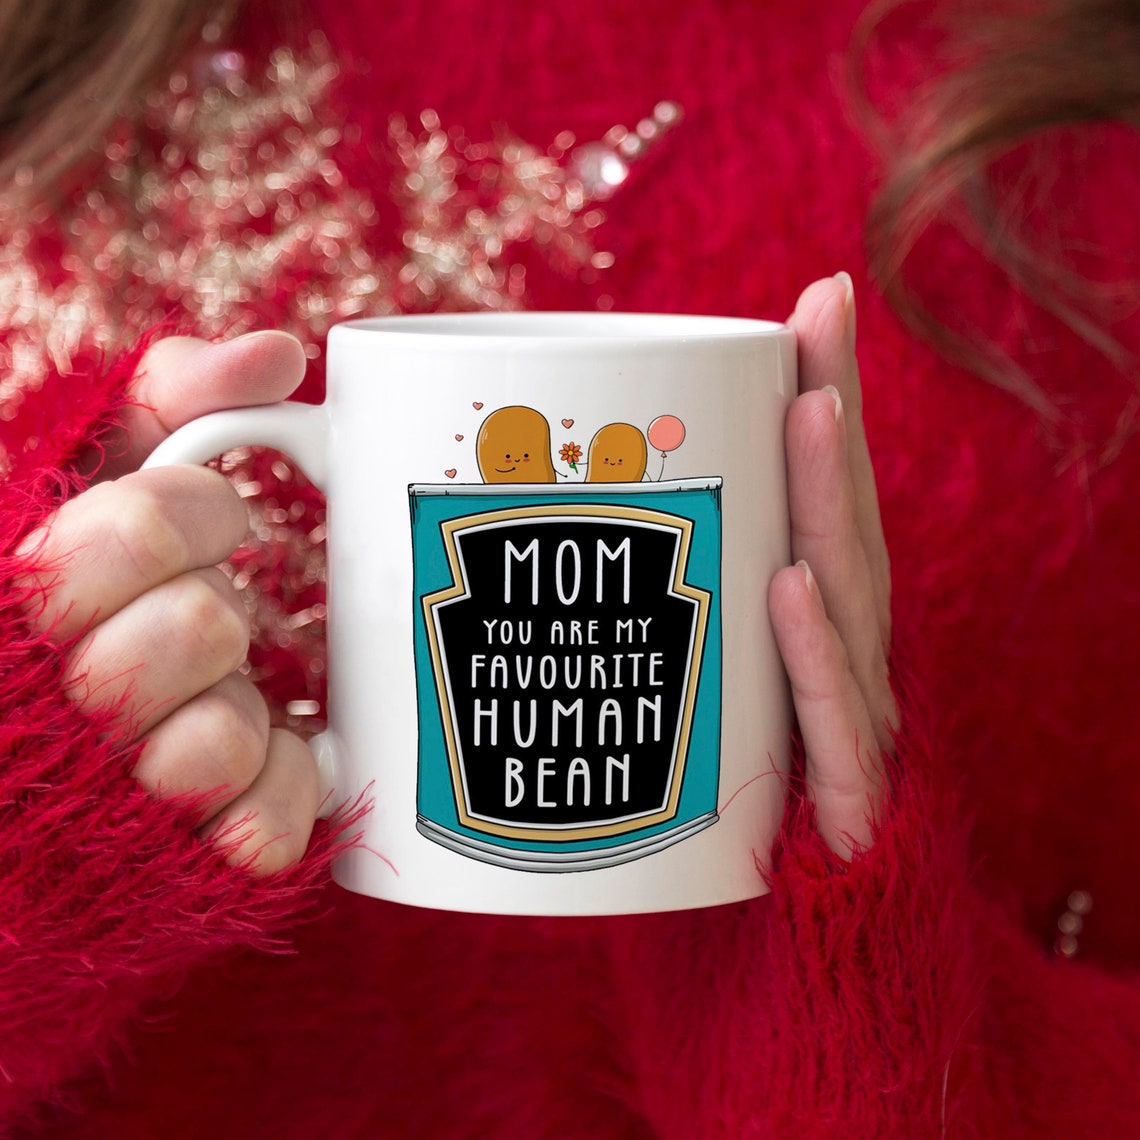 You're My Favourite Human Bean - Personalized Custom Mother's Day Mug